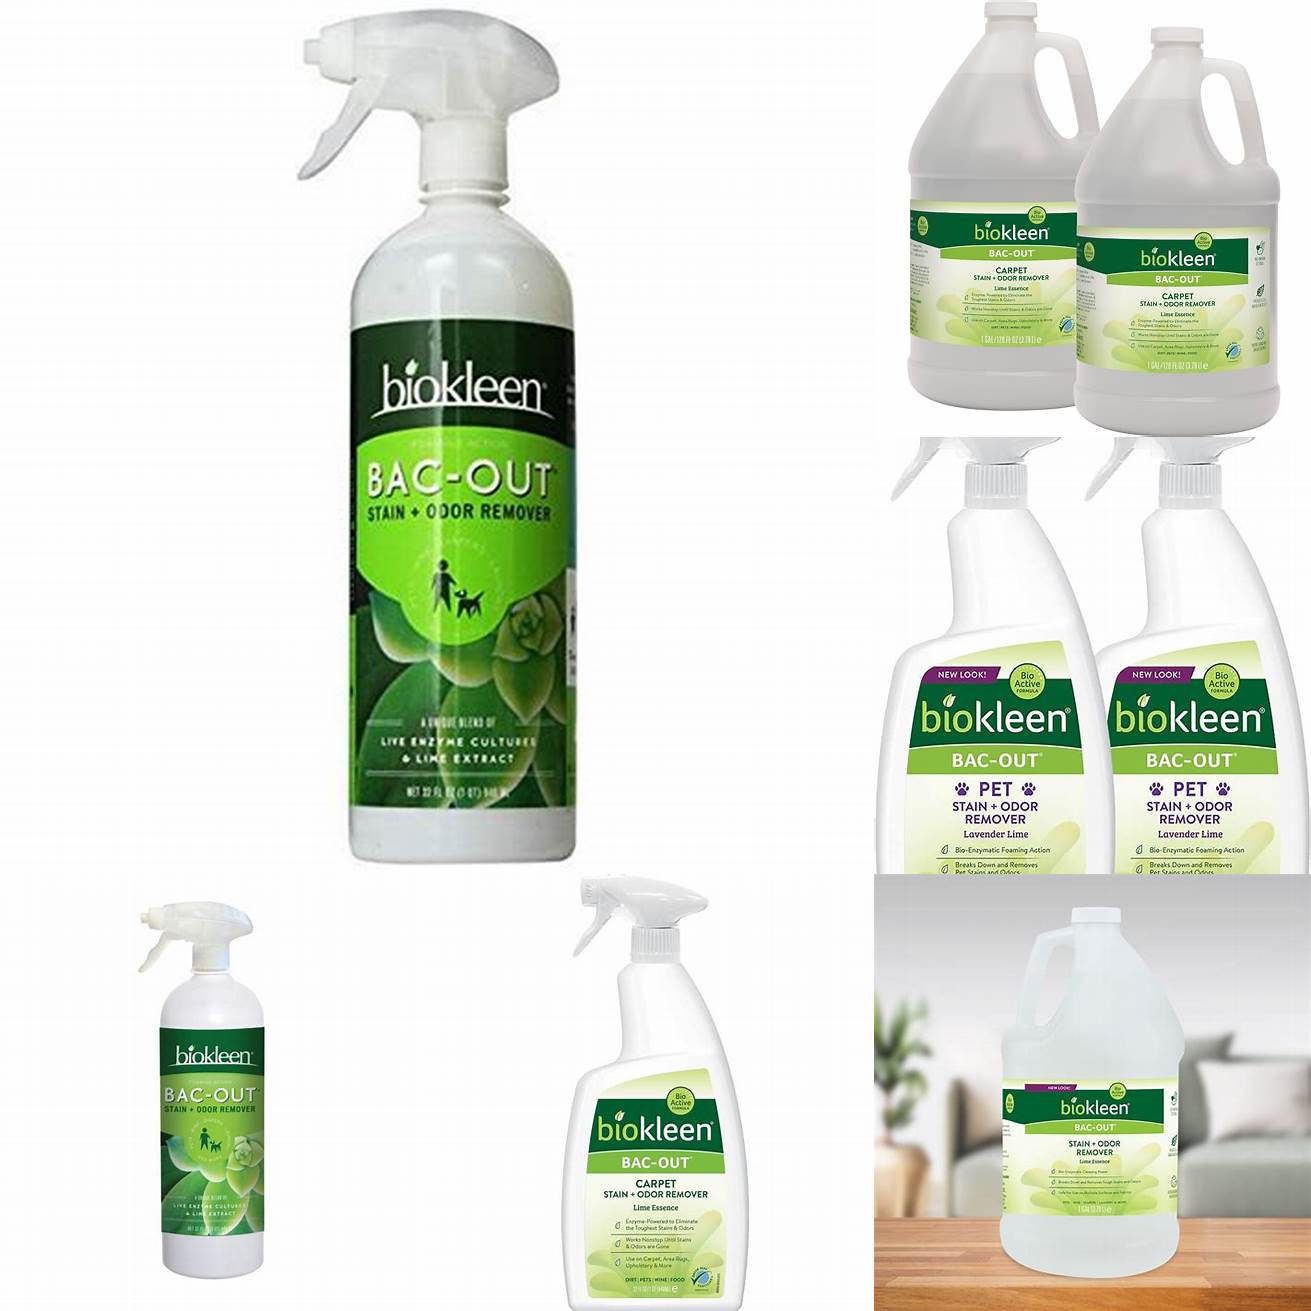 Biokleen Bac-Out Stain Odor Remover